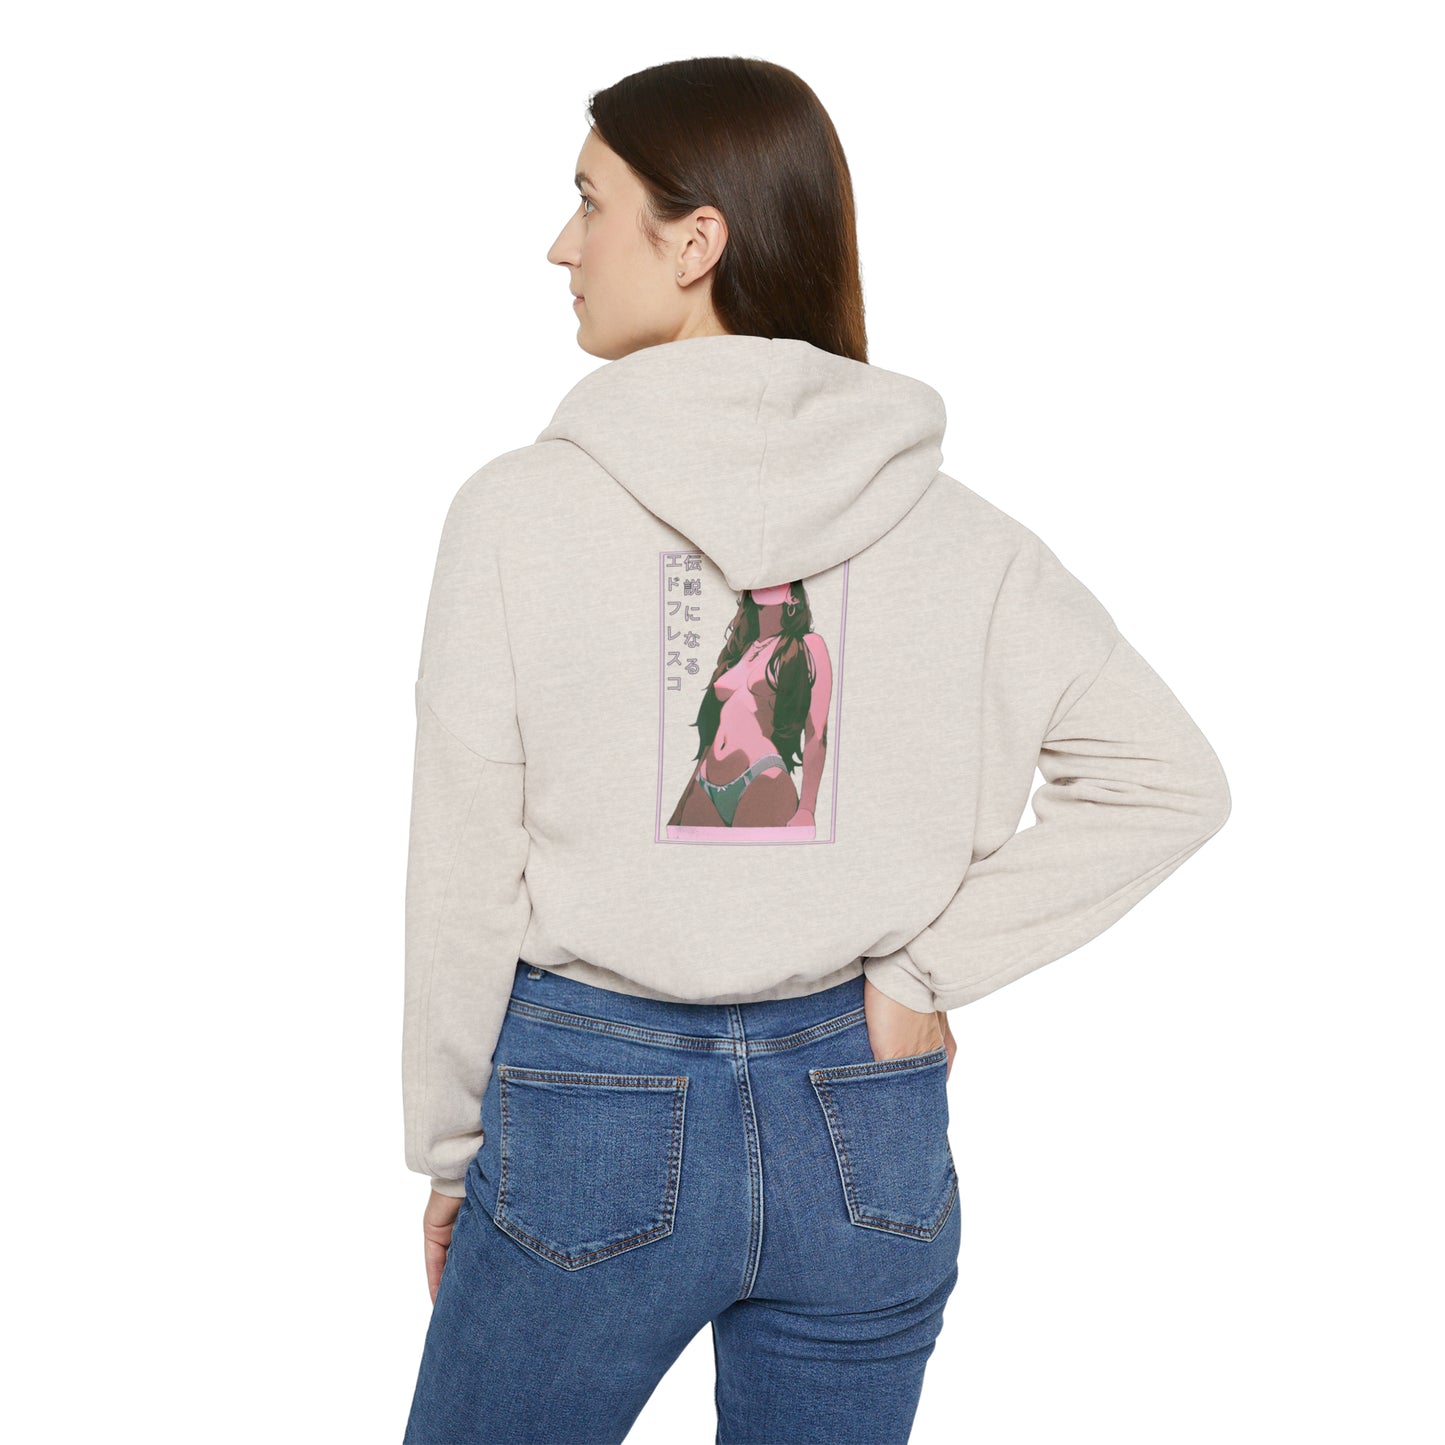 Anime Style Art Women's Cinched Bottom Hoodie- "Electric"